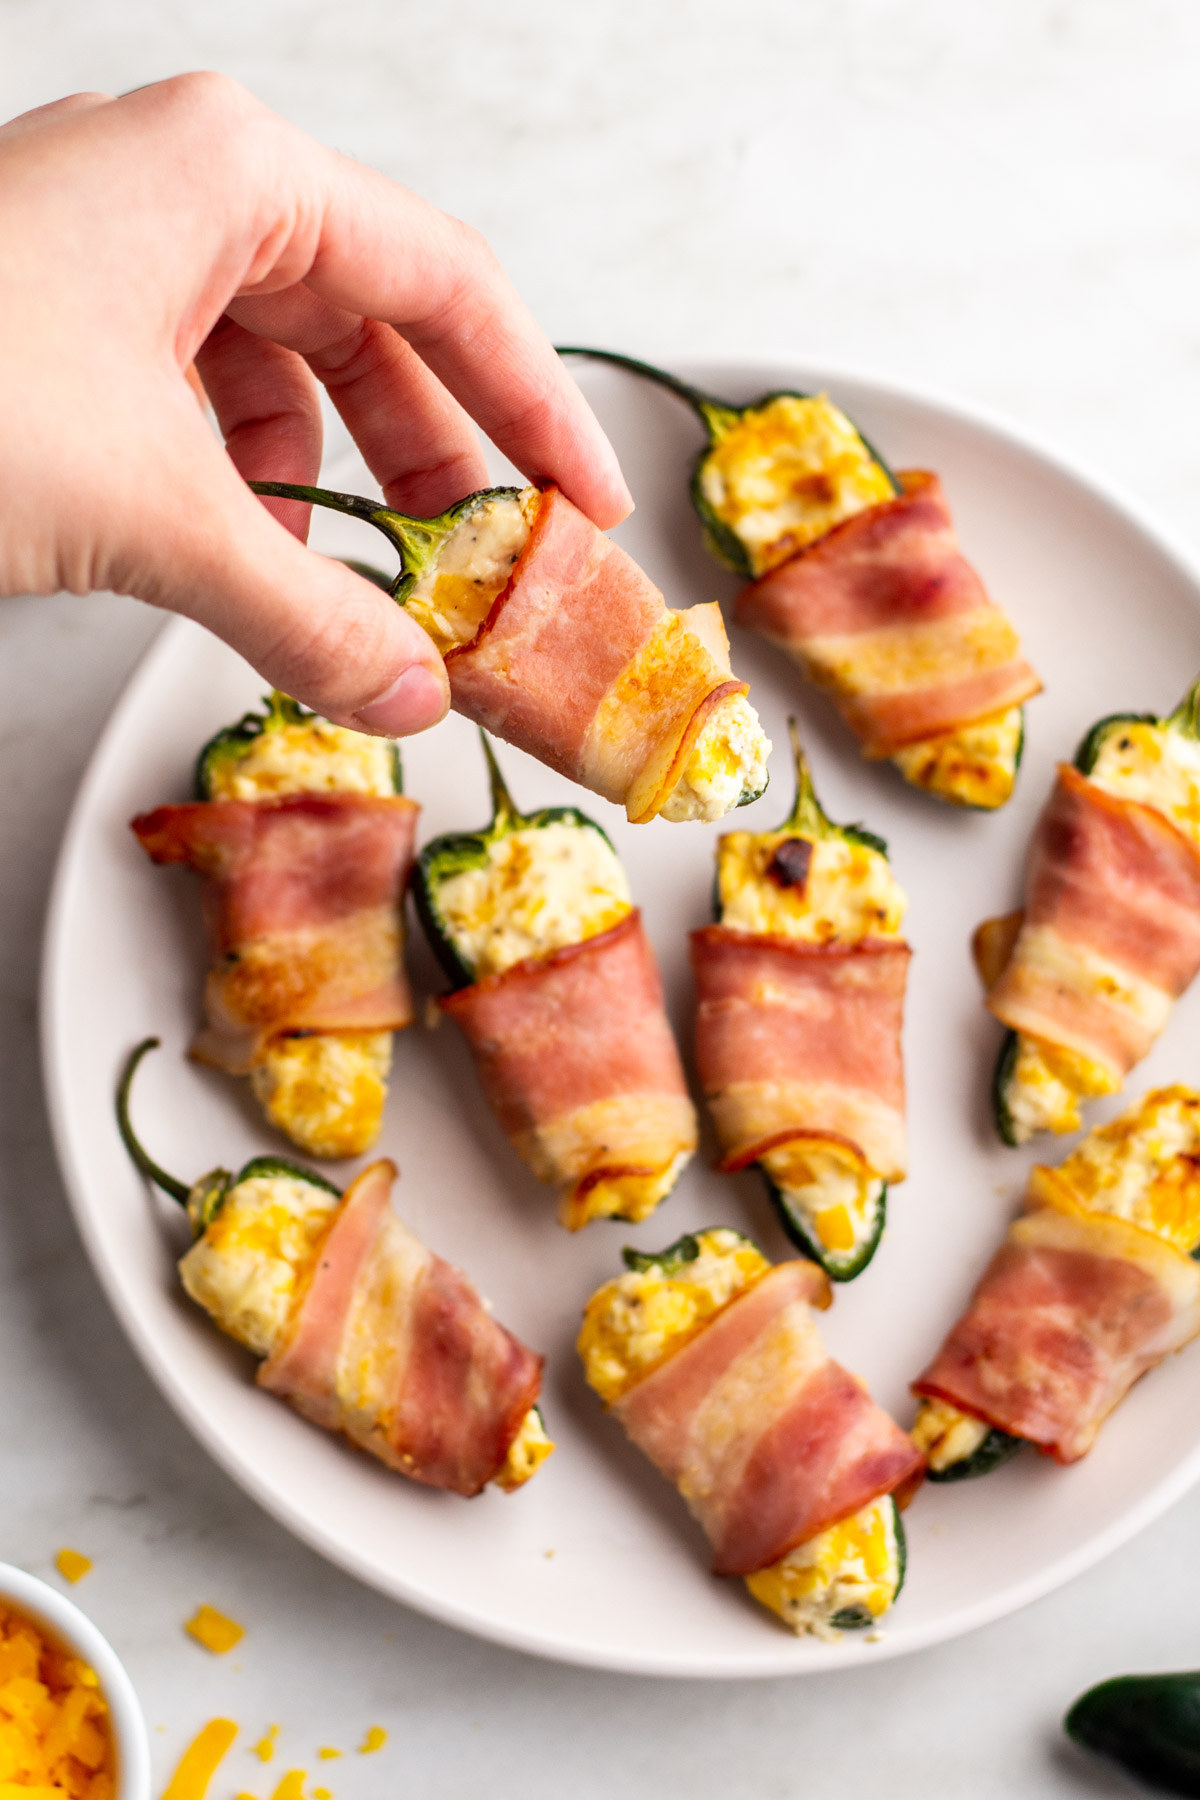 https://www.wholekitchensink.com/wp-content/uploads/2023/01/Air-Fryer-Bacon-Wrapped-Jalapeno-Poppers-15.jpg